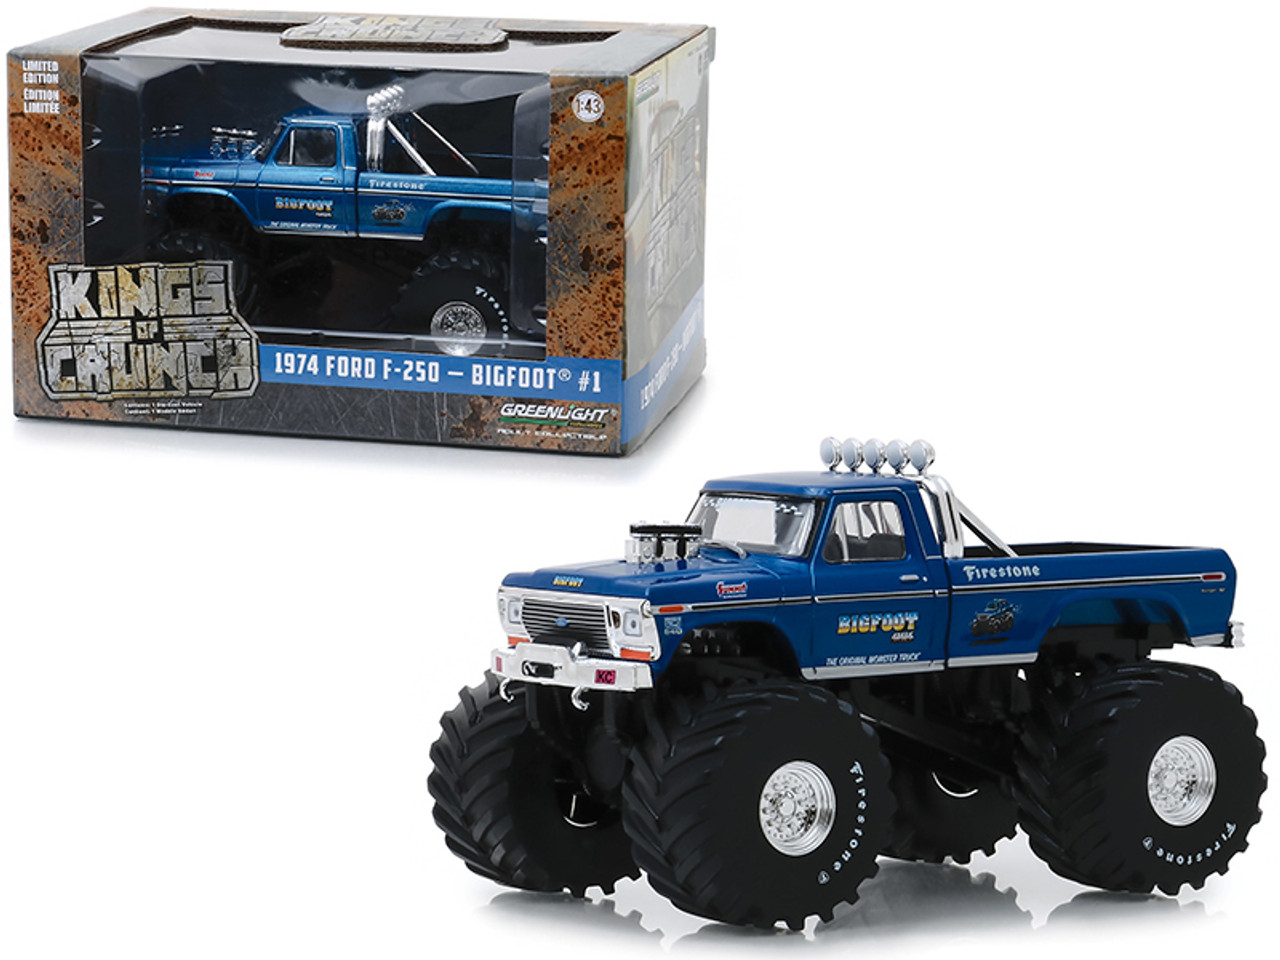 1974 Ford F-250 Monster Truck Bigfoot #1 Blue with 66-Inch Tires "Kings of Crunch" 1/43 Diecast Model Car by Greenlight